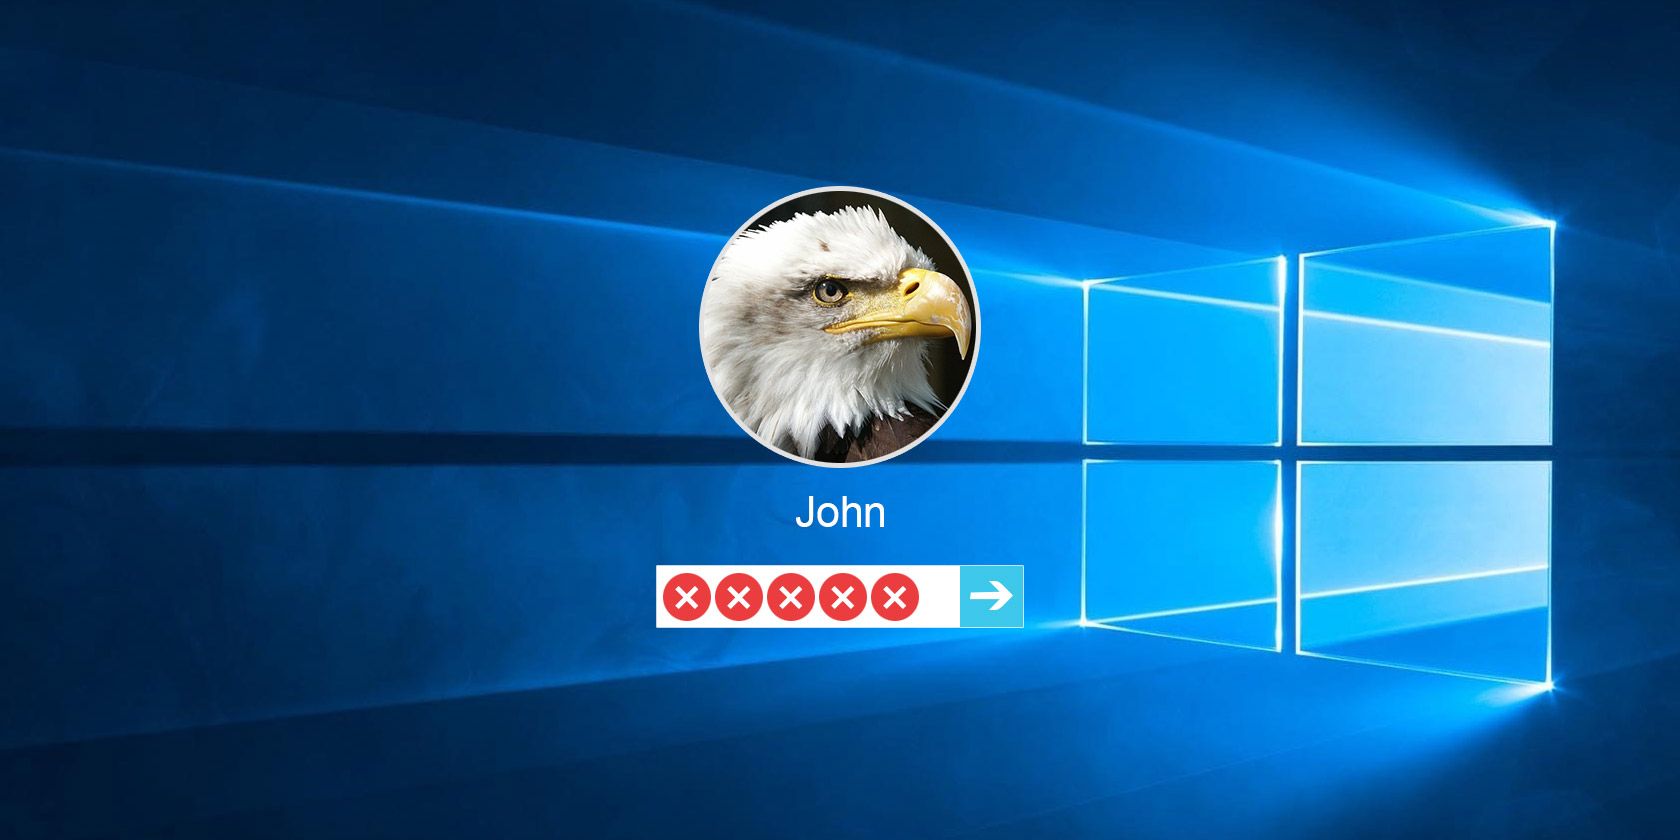 Windows 10 login screen with X icons in the password field